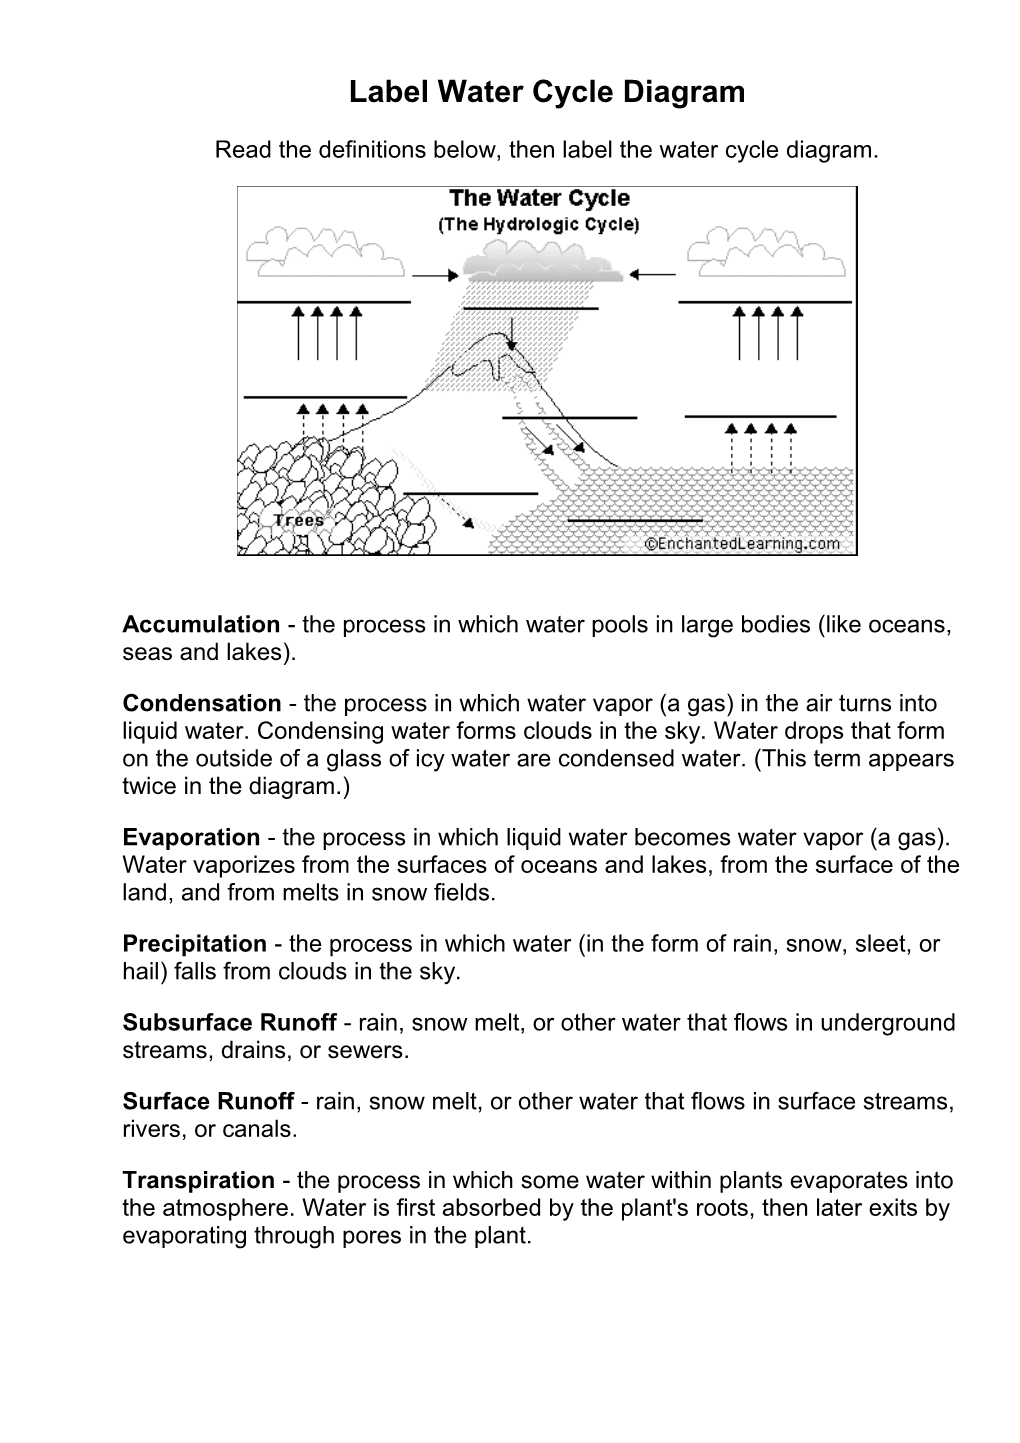 Label Water Cycle Diagram